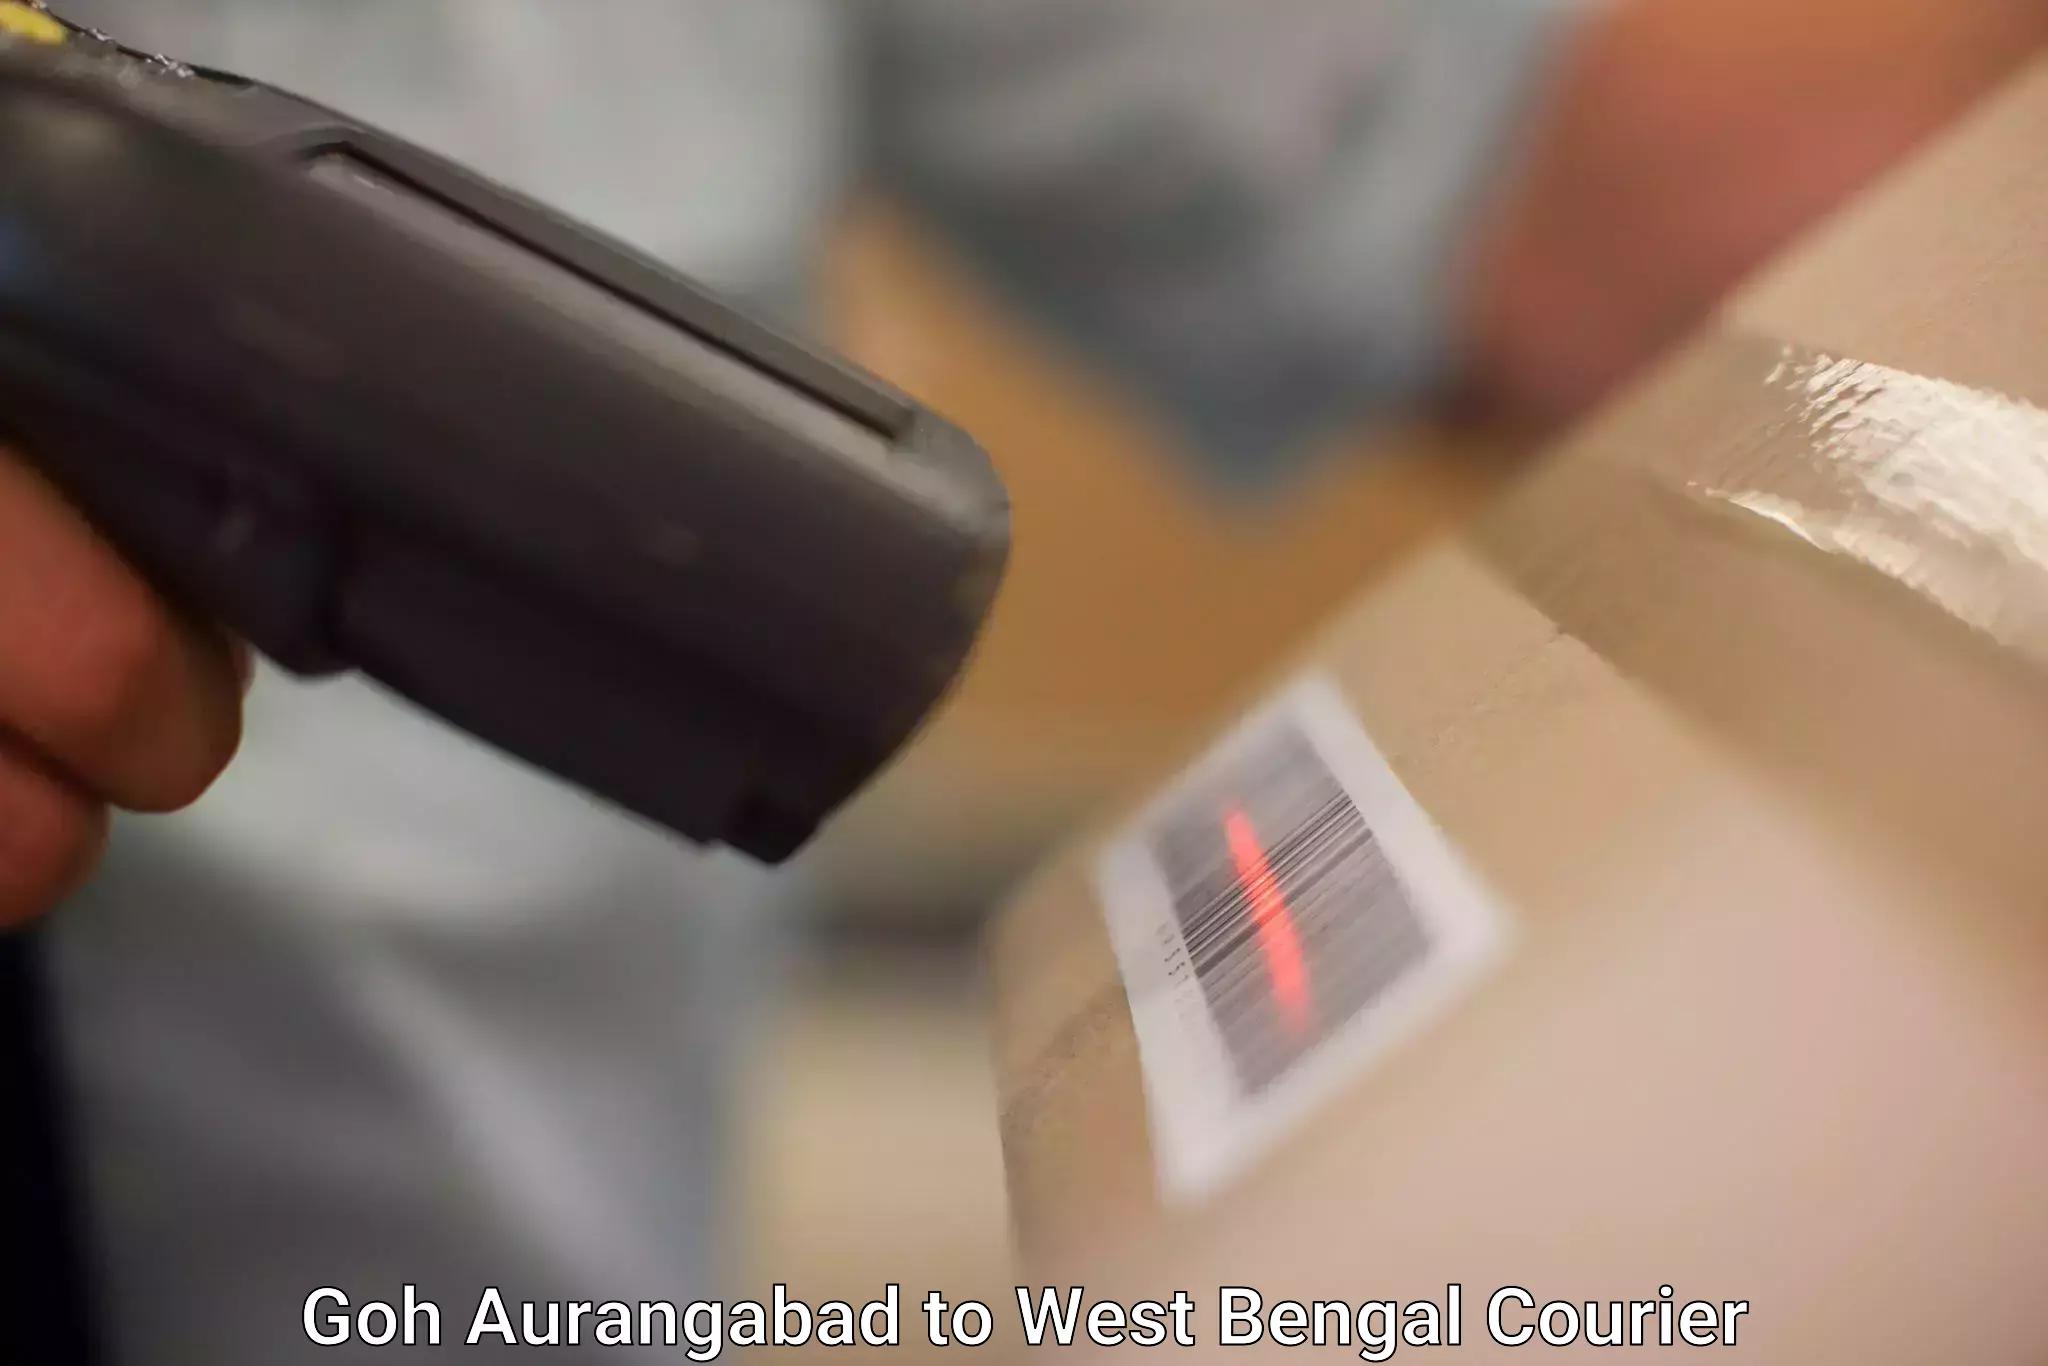 State-of-the-art courier technology Goh Aurangabad to West Bengal